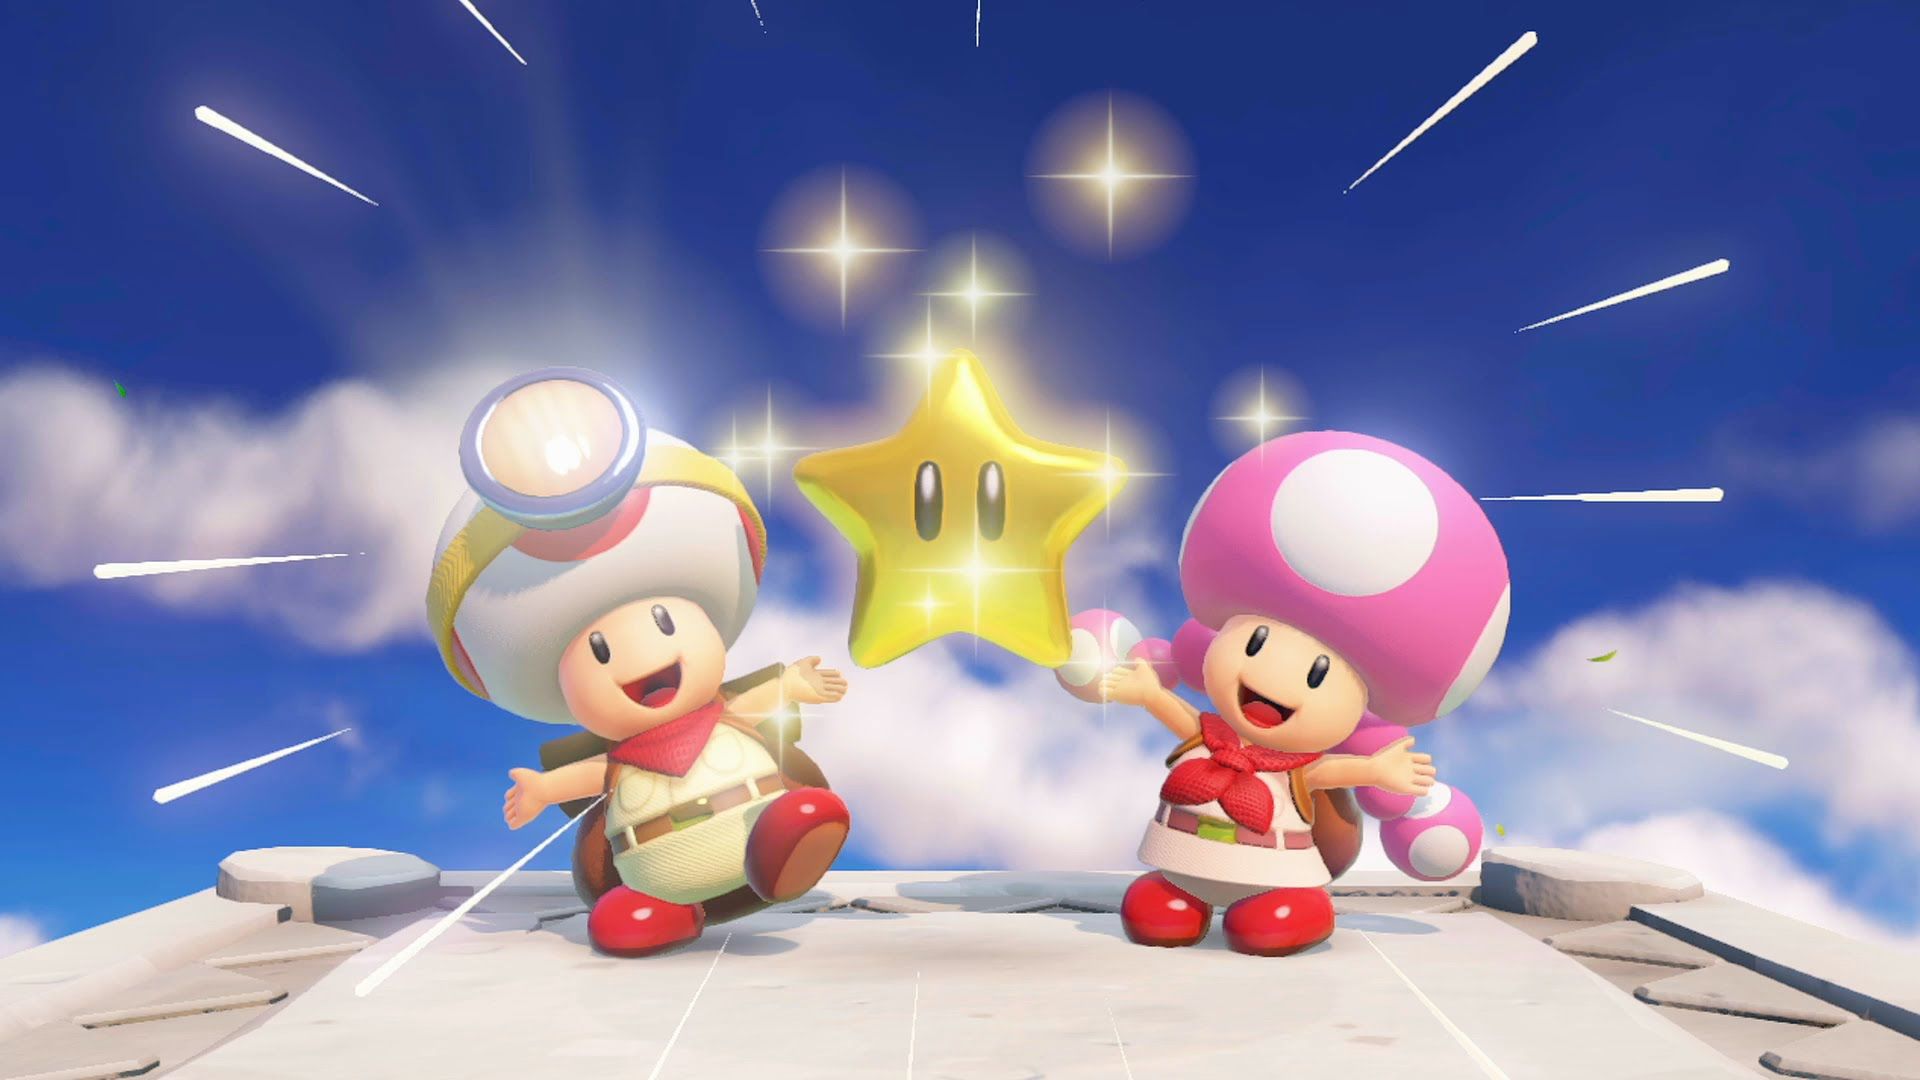 Captain Toad: Treasure Tracker footage introduces Captain Toadette